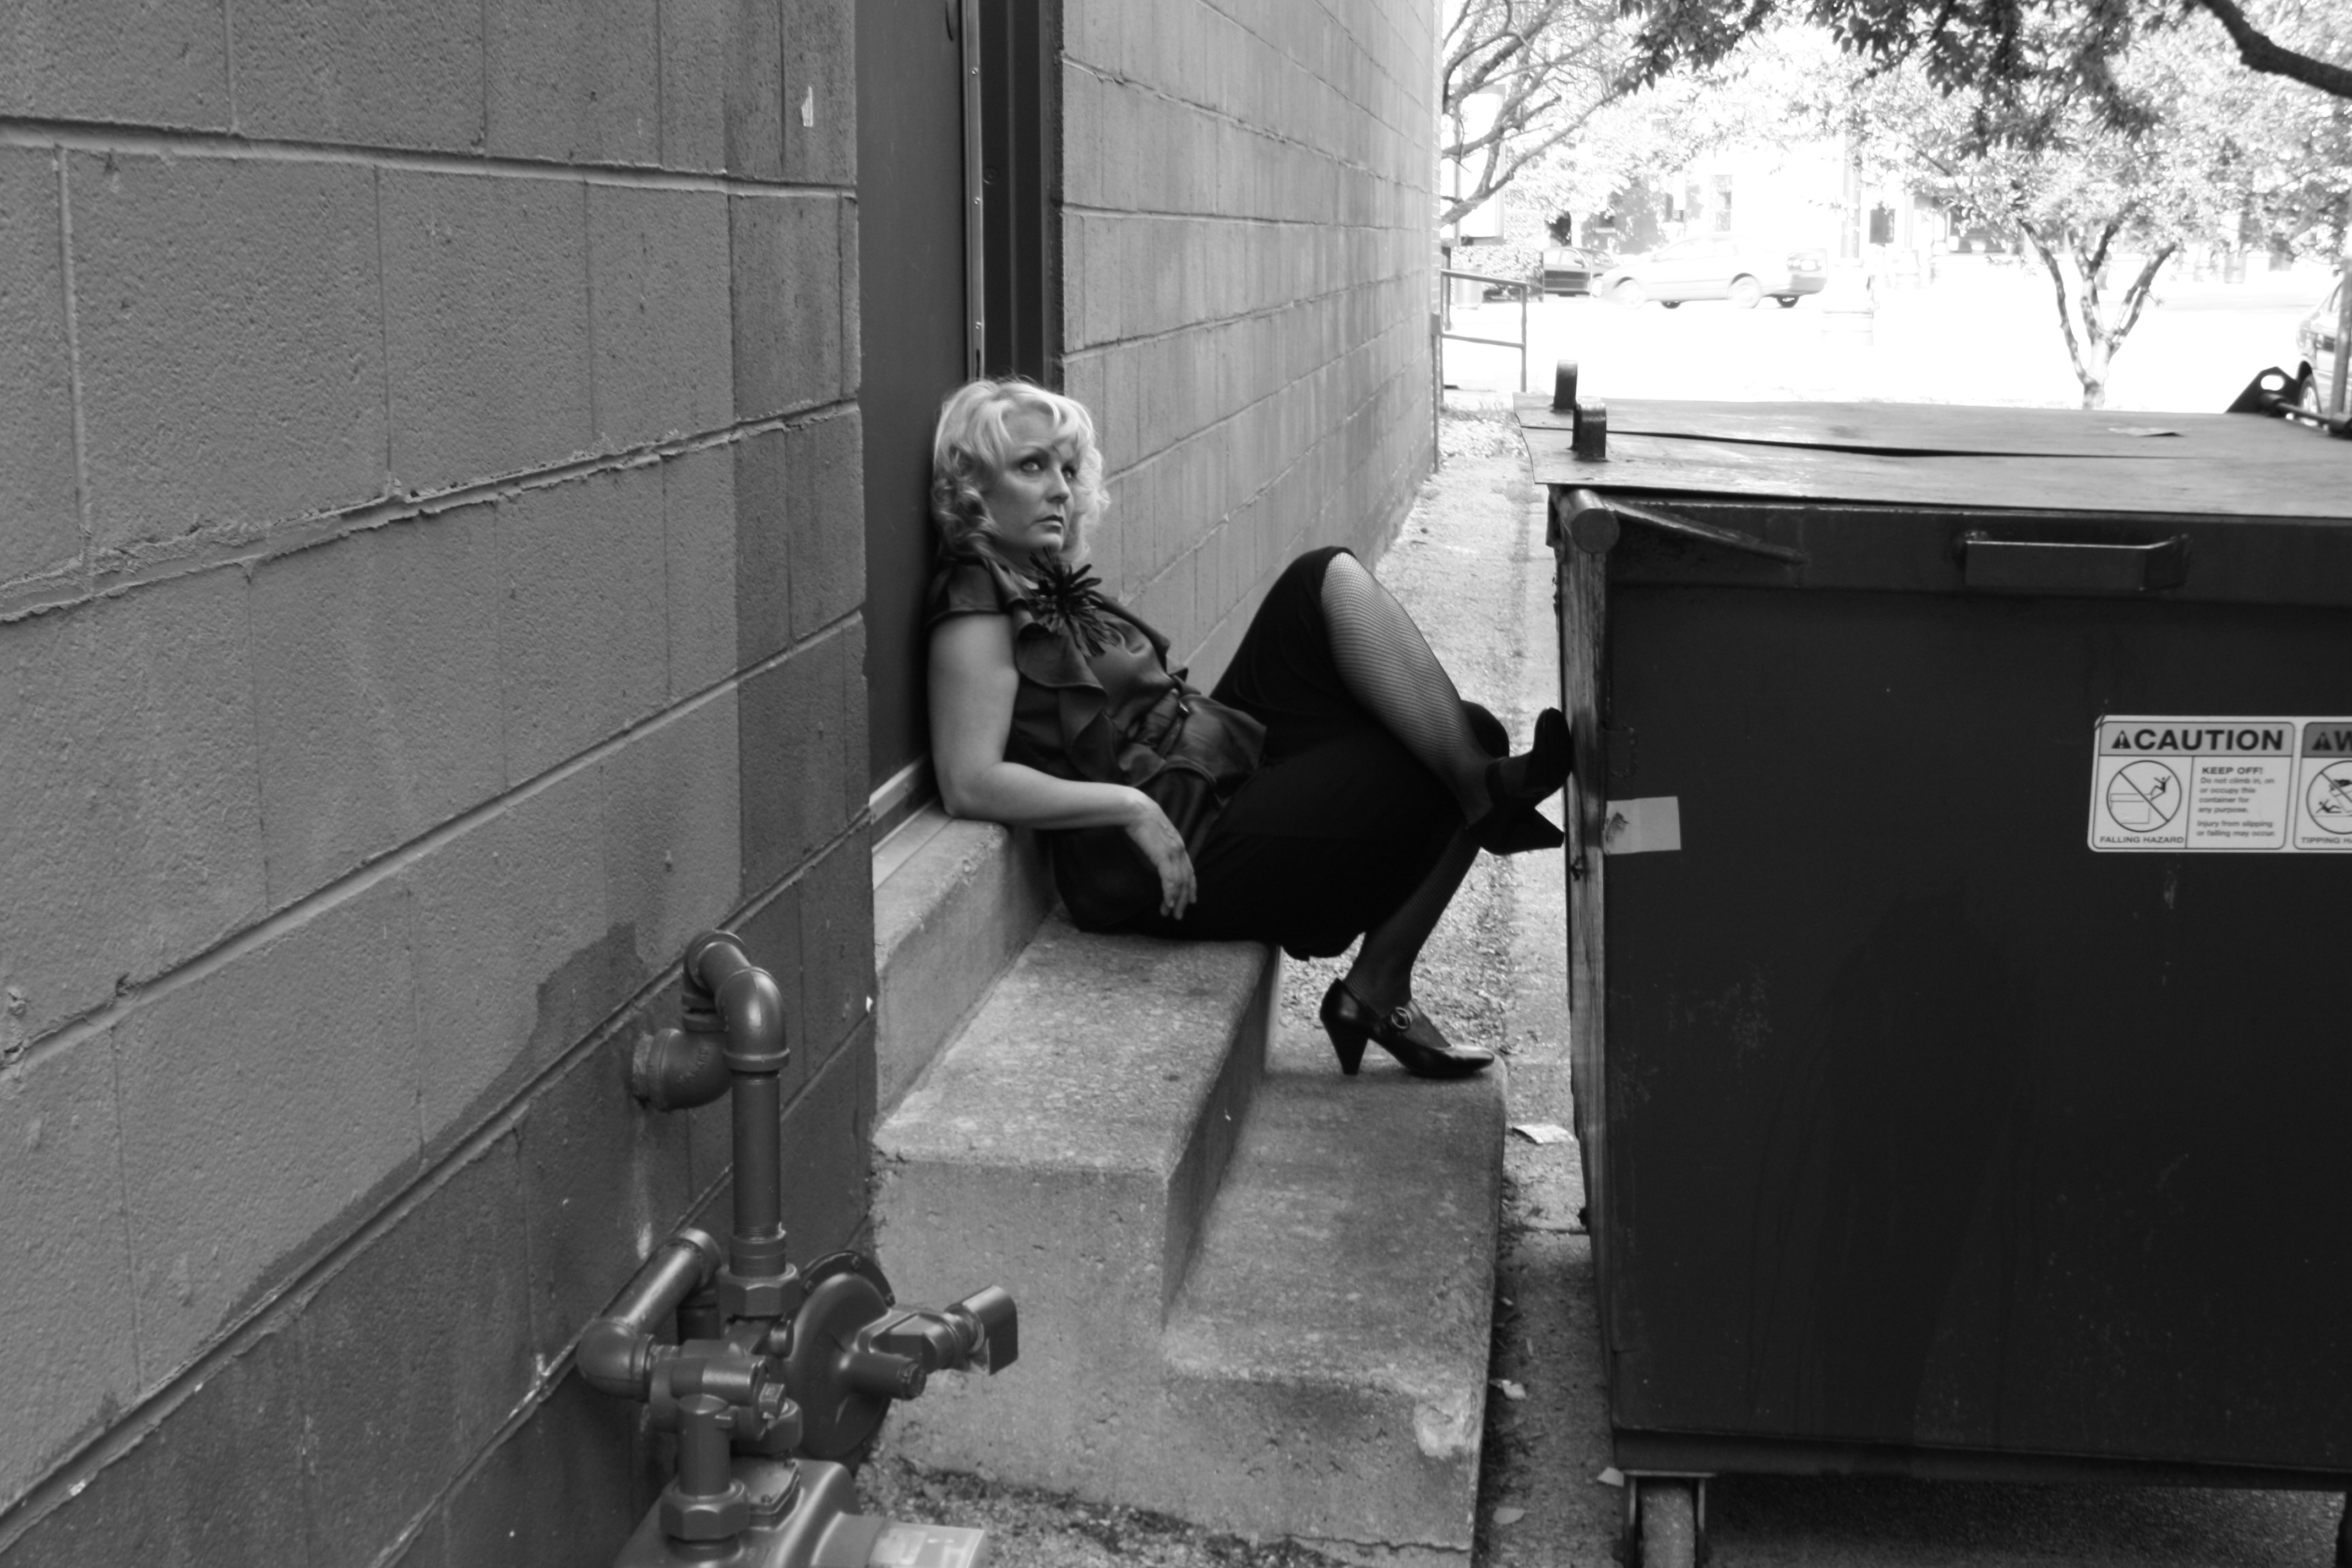 Suzanne Sole - The View from the Dumpster